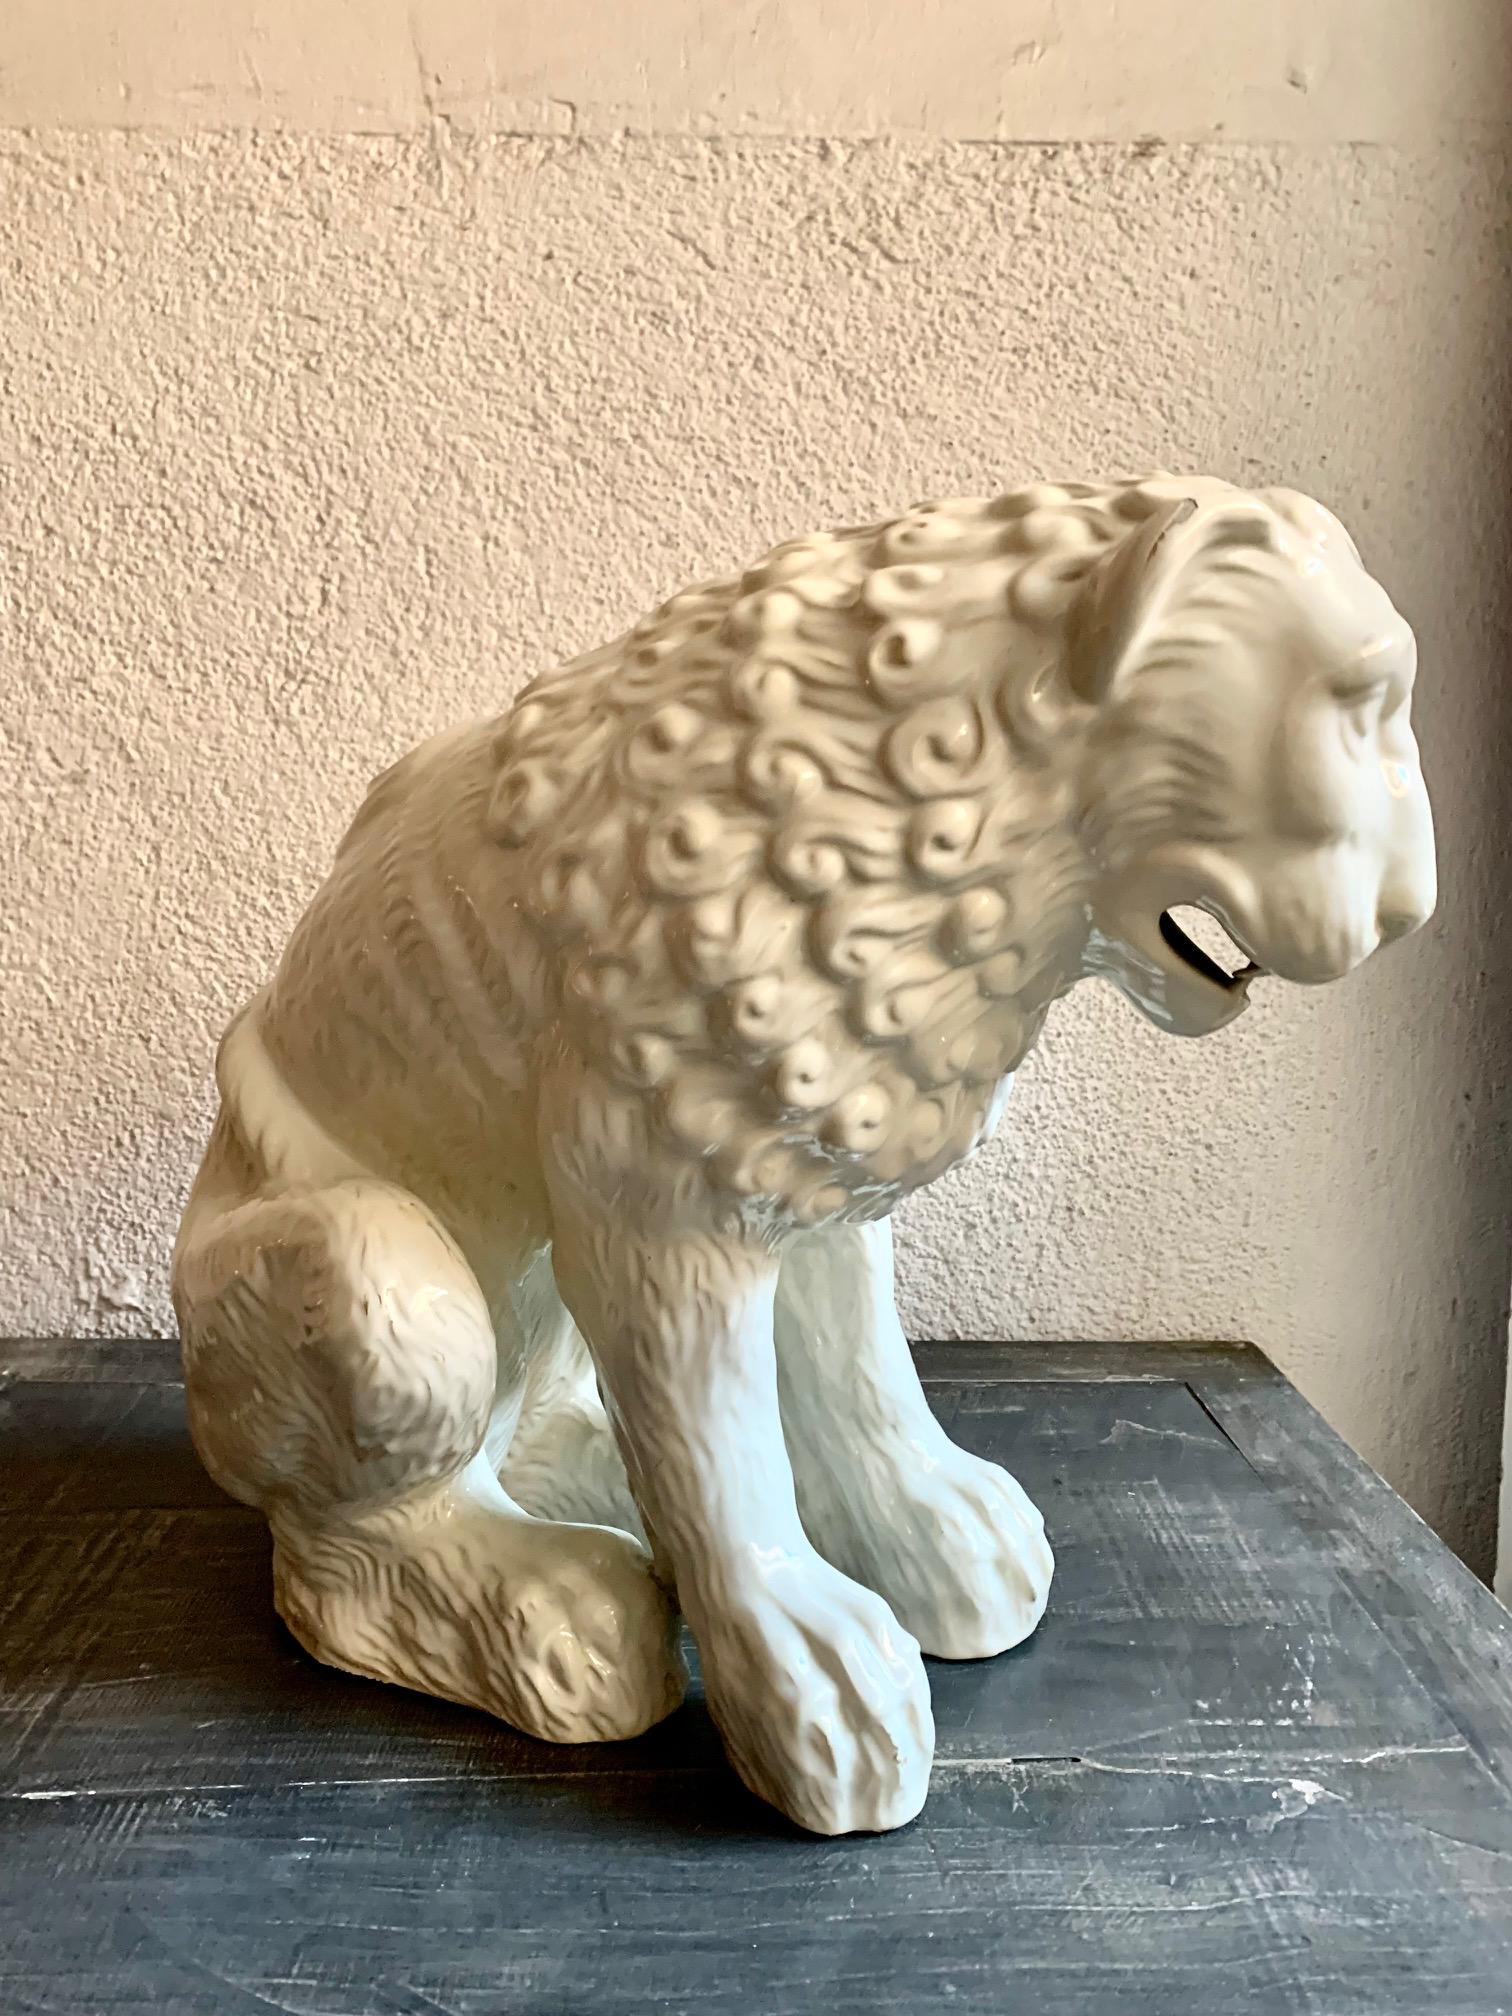 Other Large Sculpture Whihe Glazed Earthenware Ceramic Lion For Sale